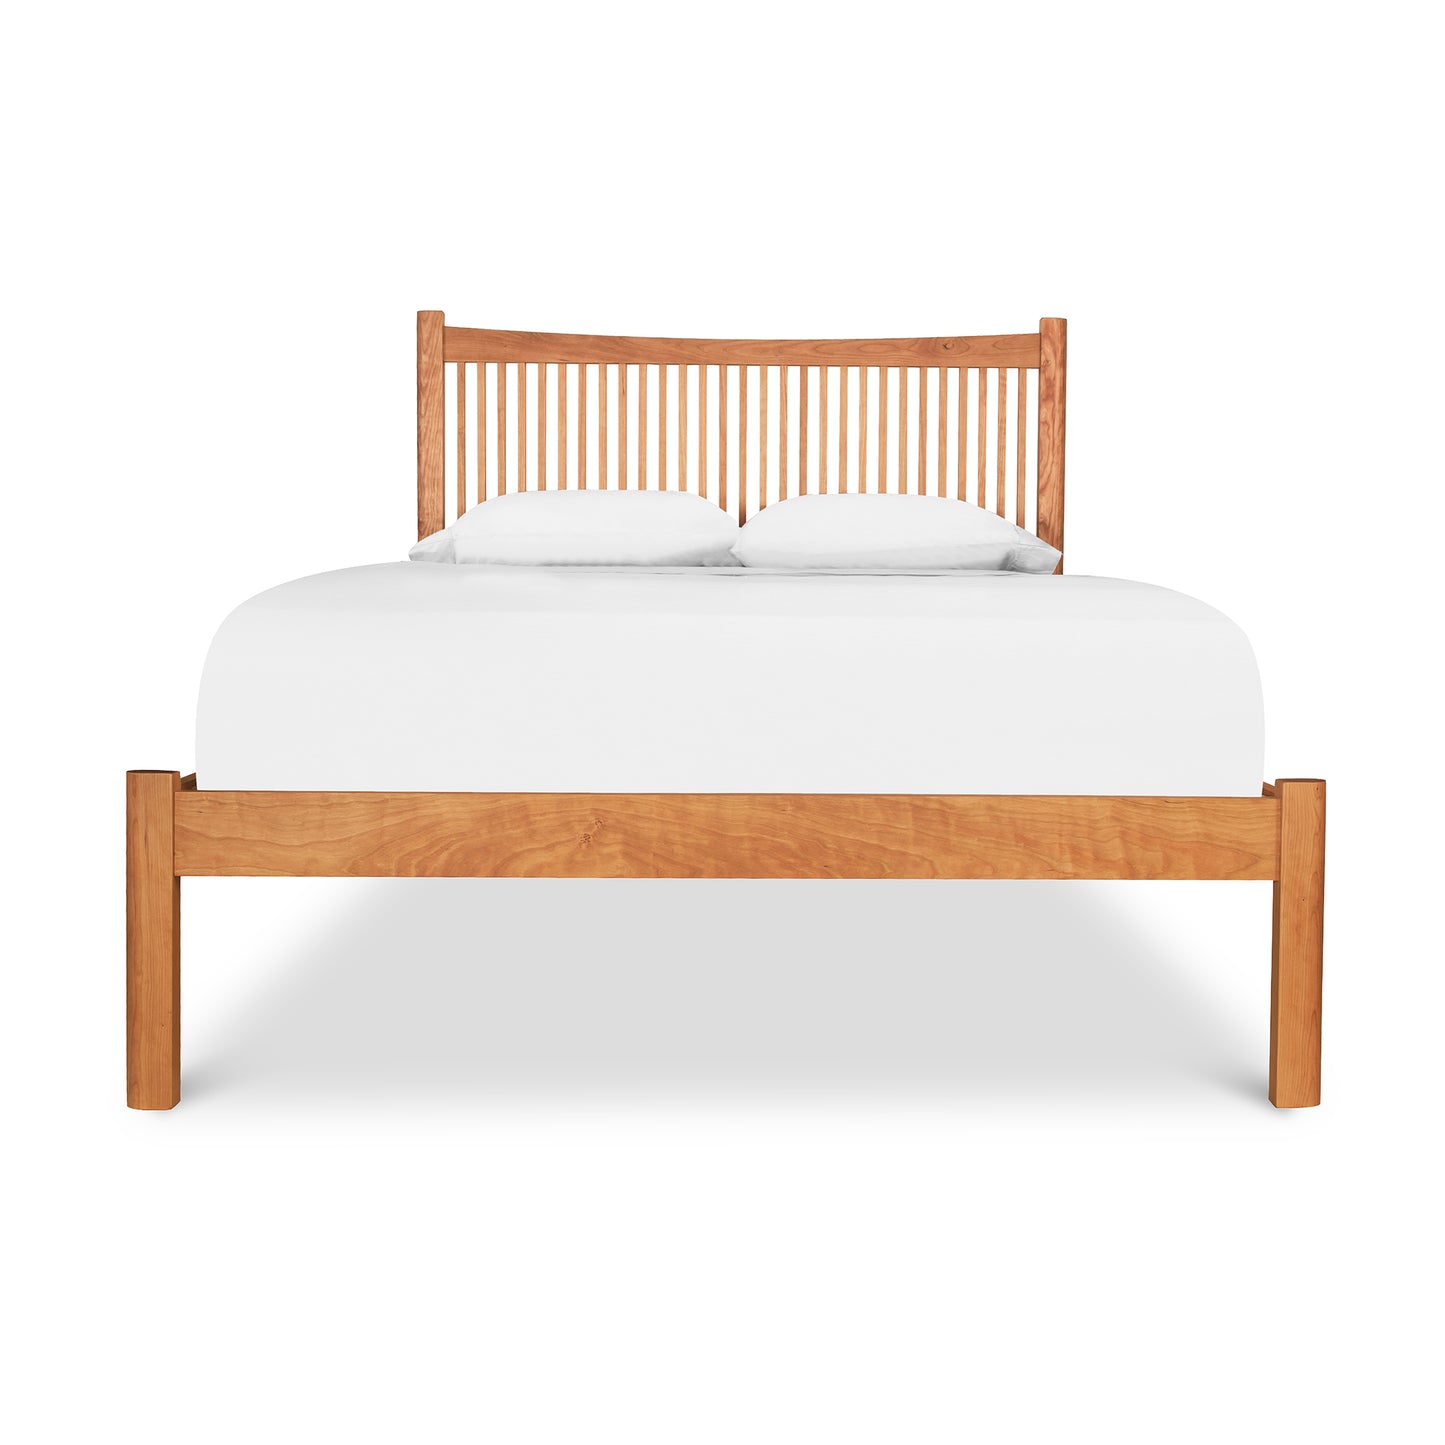 A Heartwood Shaker Low Footboard Bed by Vermont Furniture Designs with Arts and Crafts styling, featuring a white mattress and two pillows against a white background.